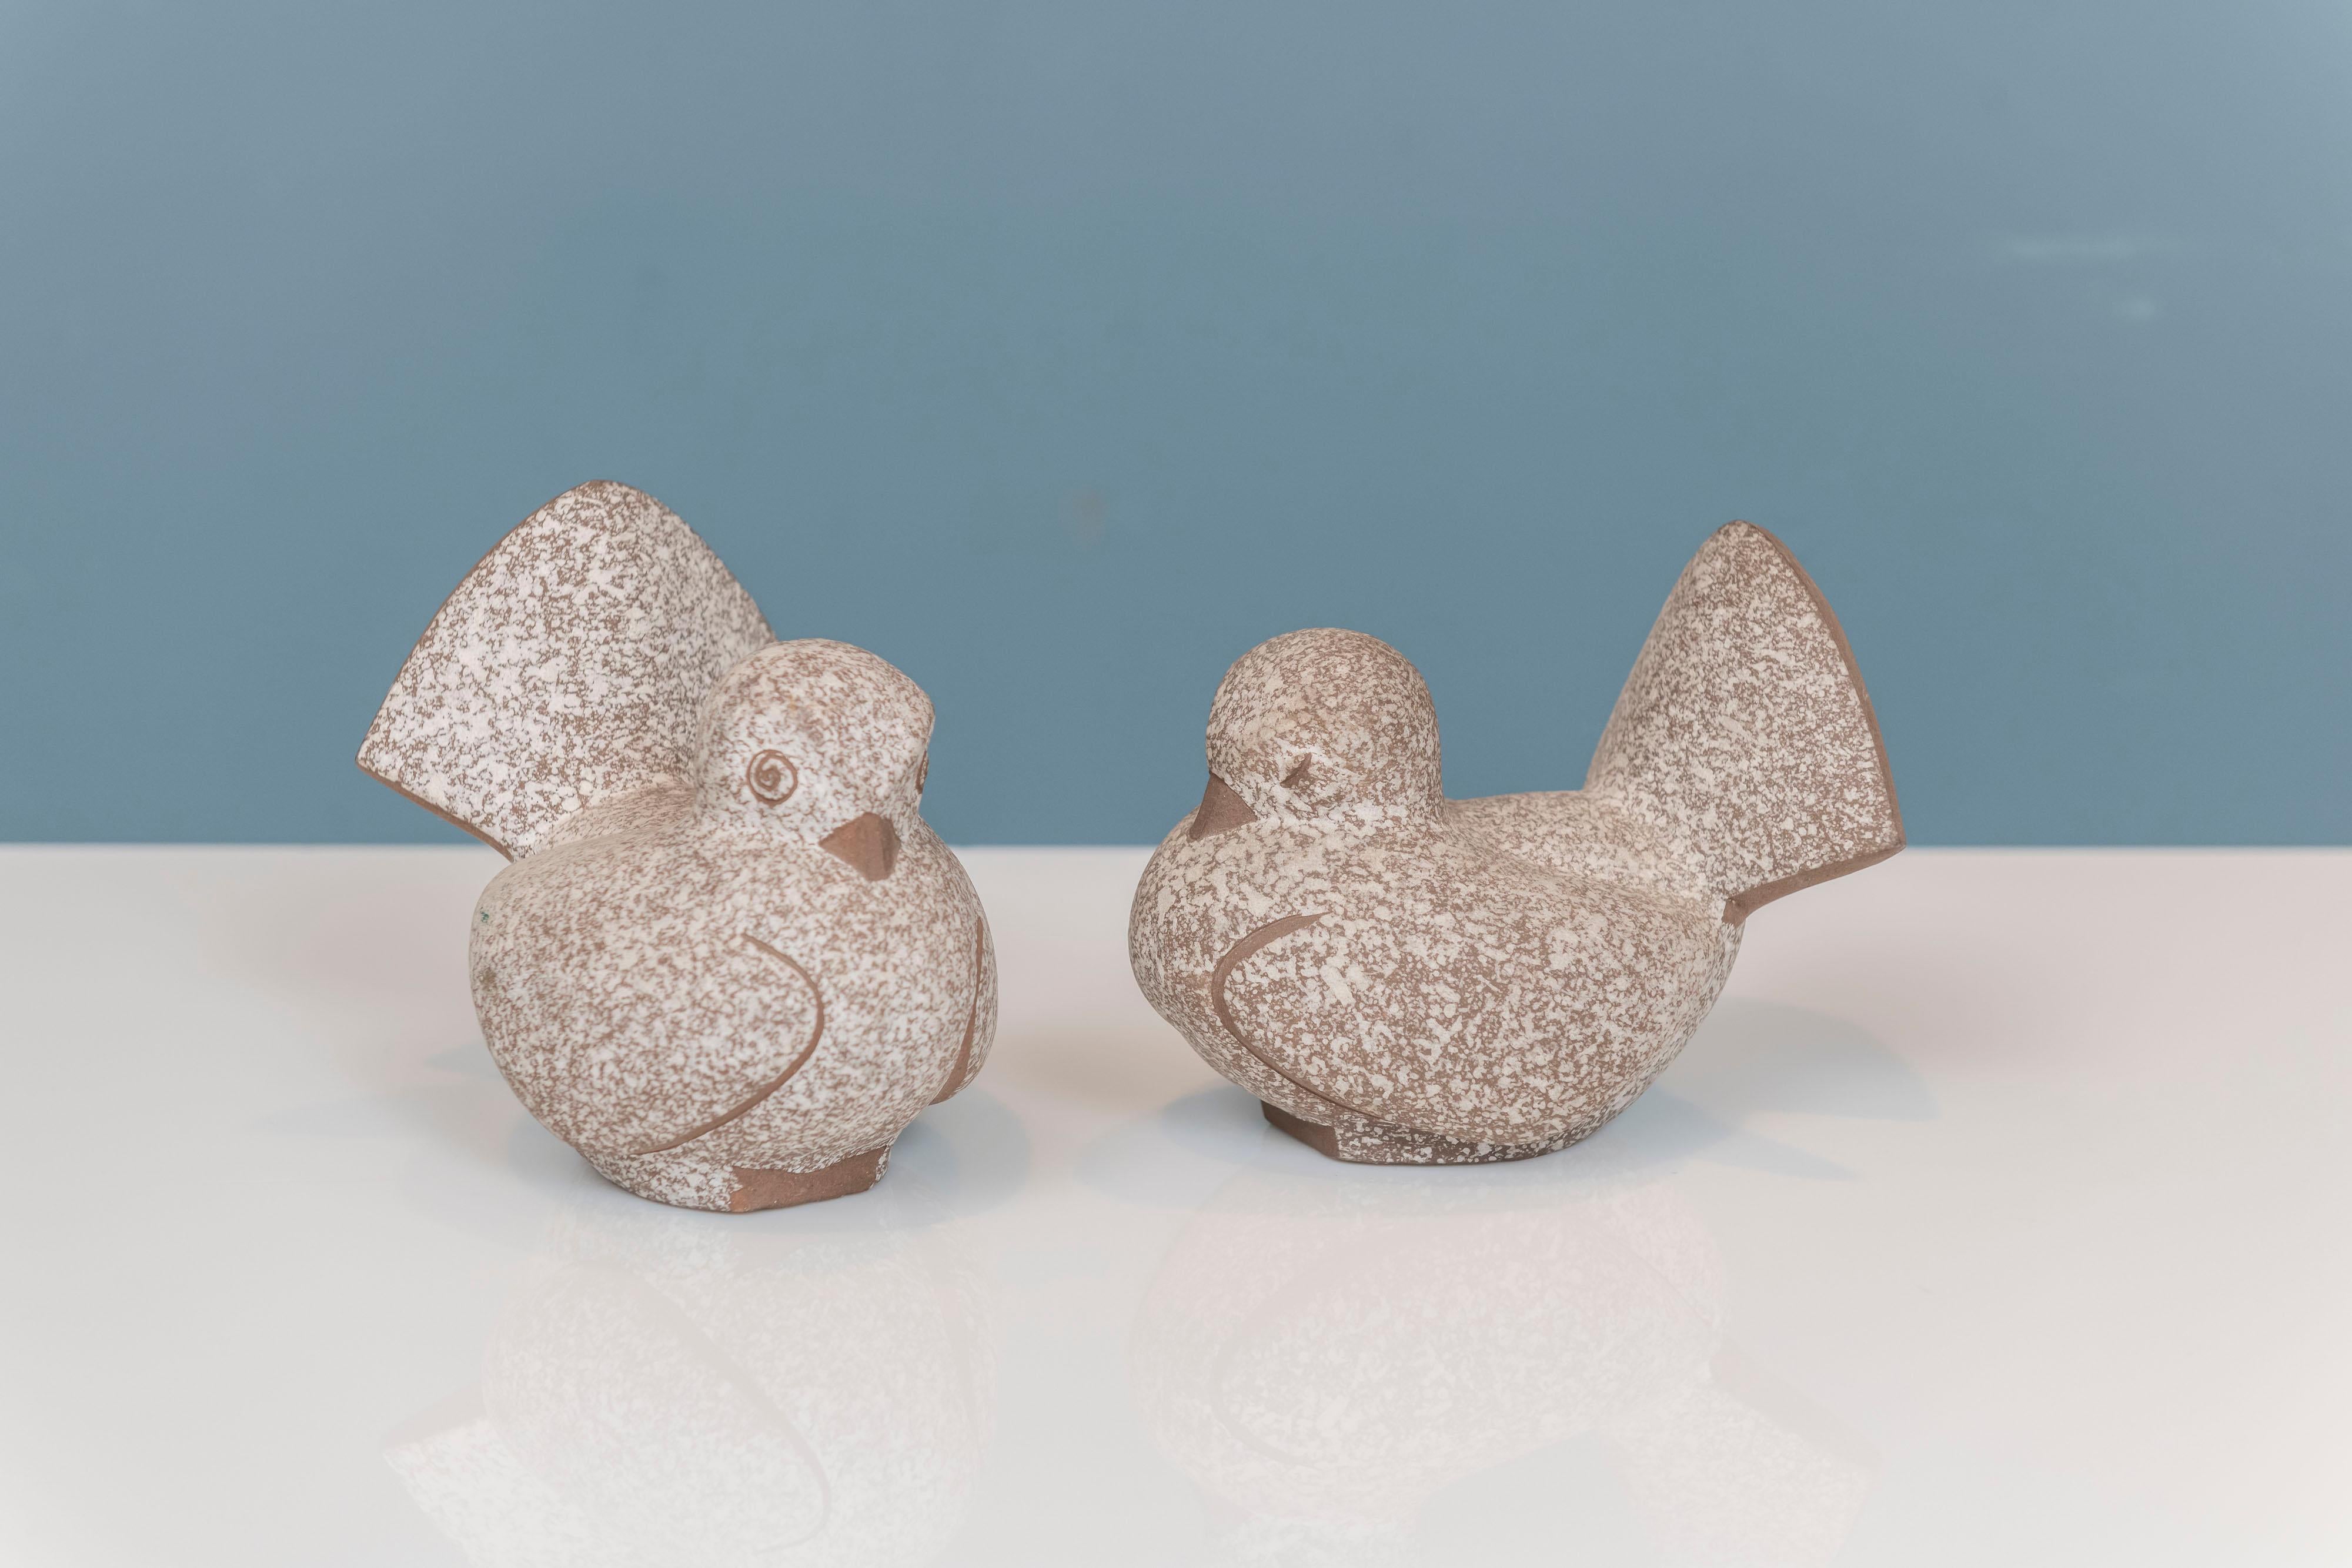 James Lovera designed love birds depicting two birds in courtship. Executed in ceramic with a speckled or frosted glaze, signed Lovera.